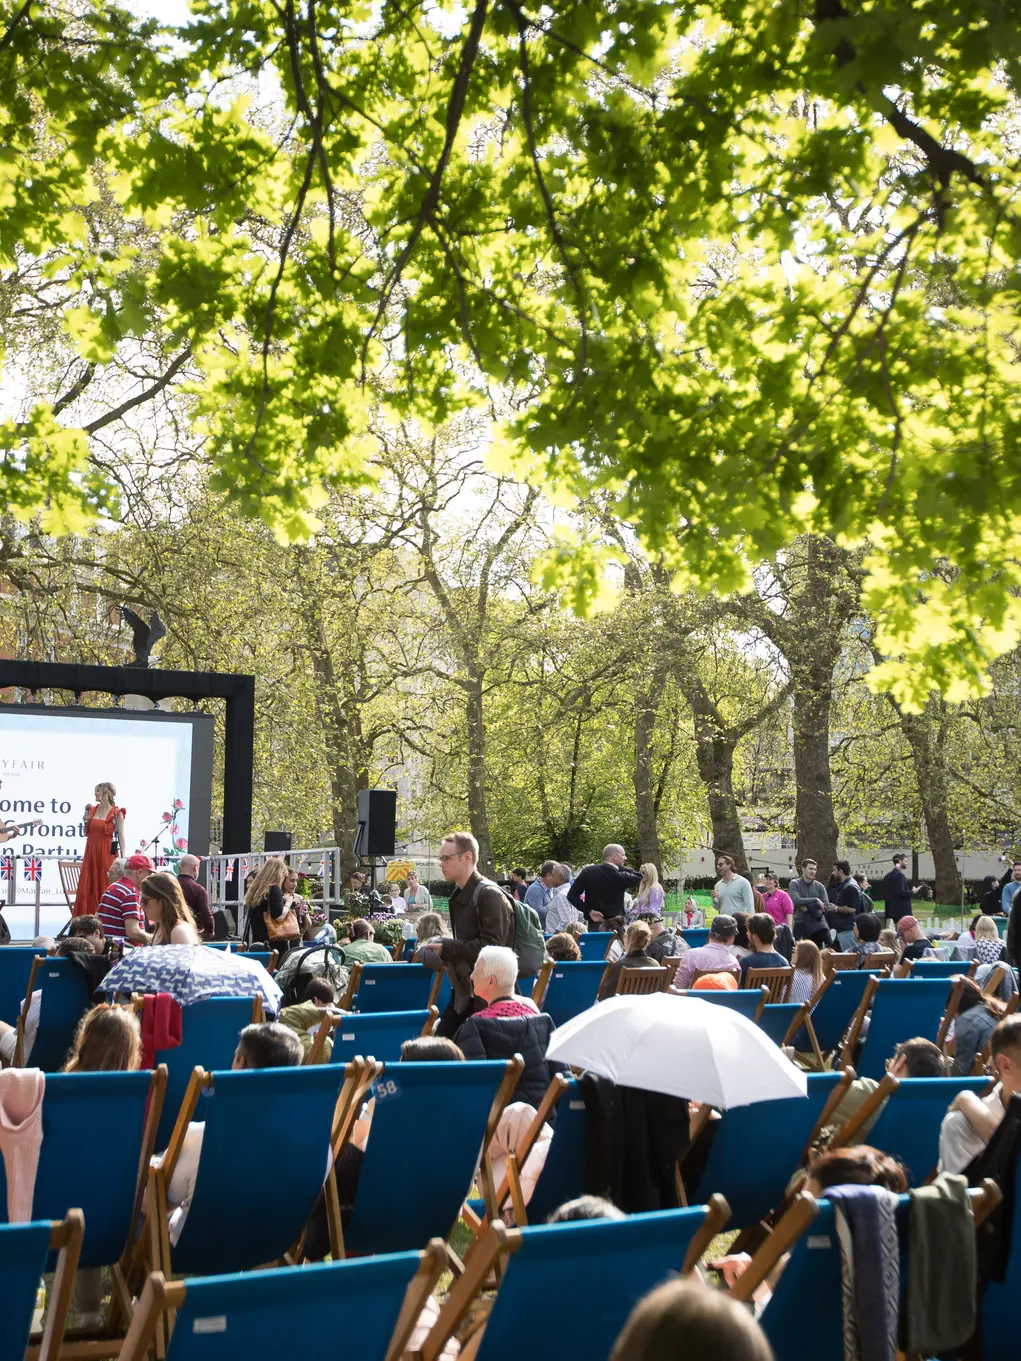 People on deckchairs facing a big screen in Grosvenor Square